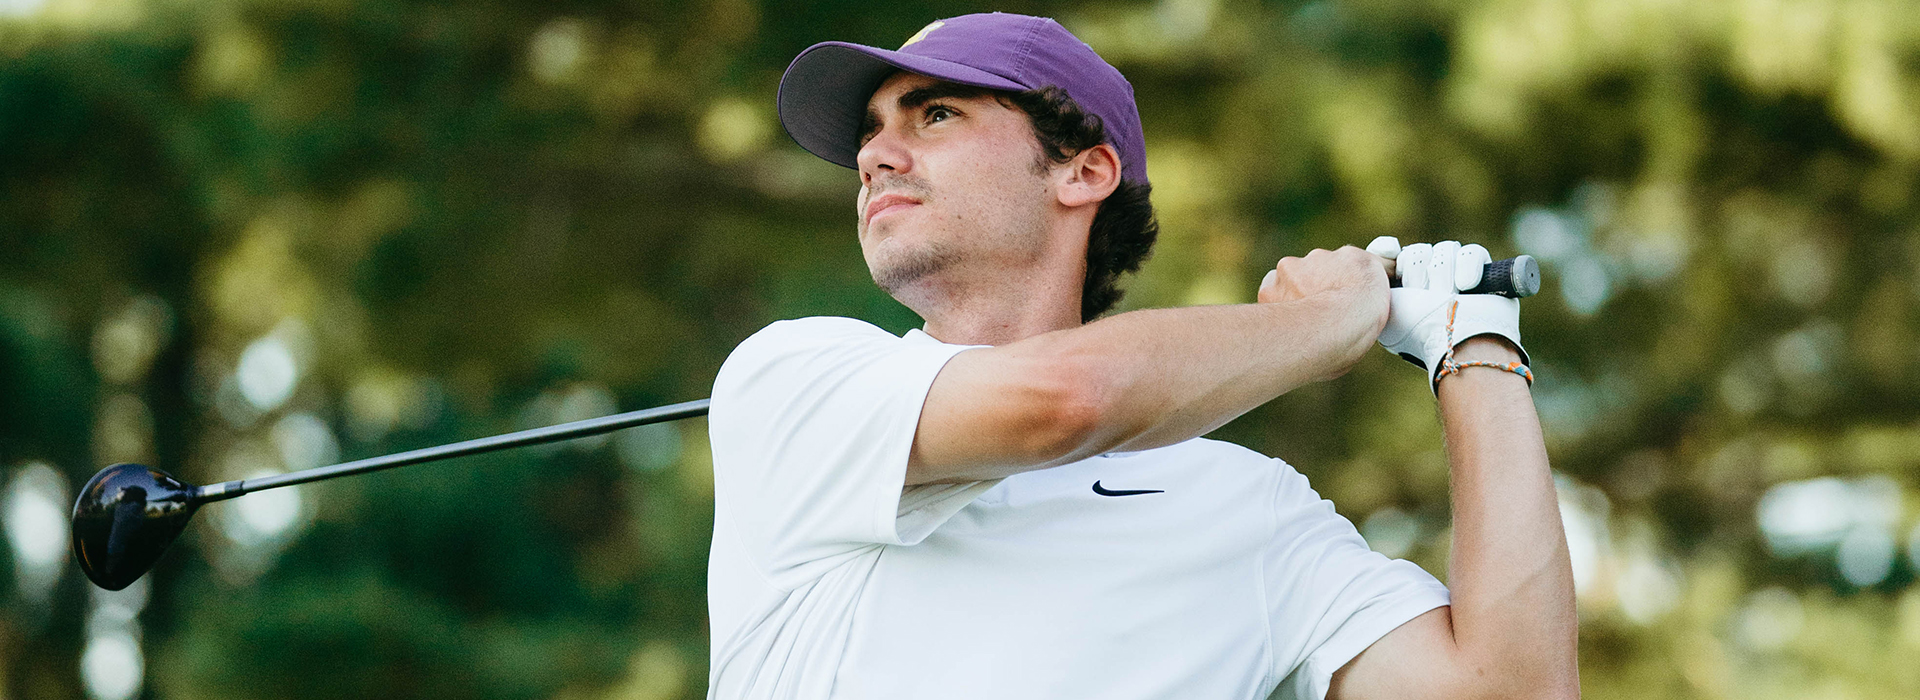 Golden Eagles eighth after round one of Golfweek Fall Challenge